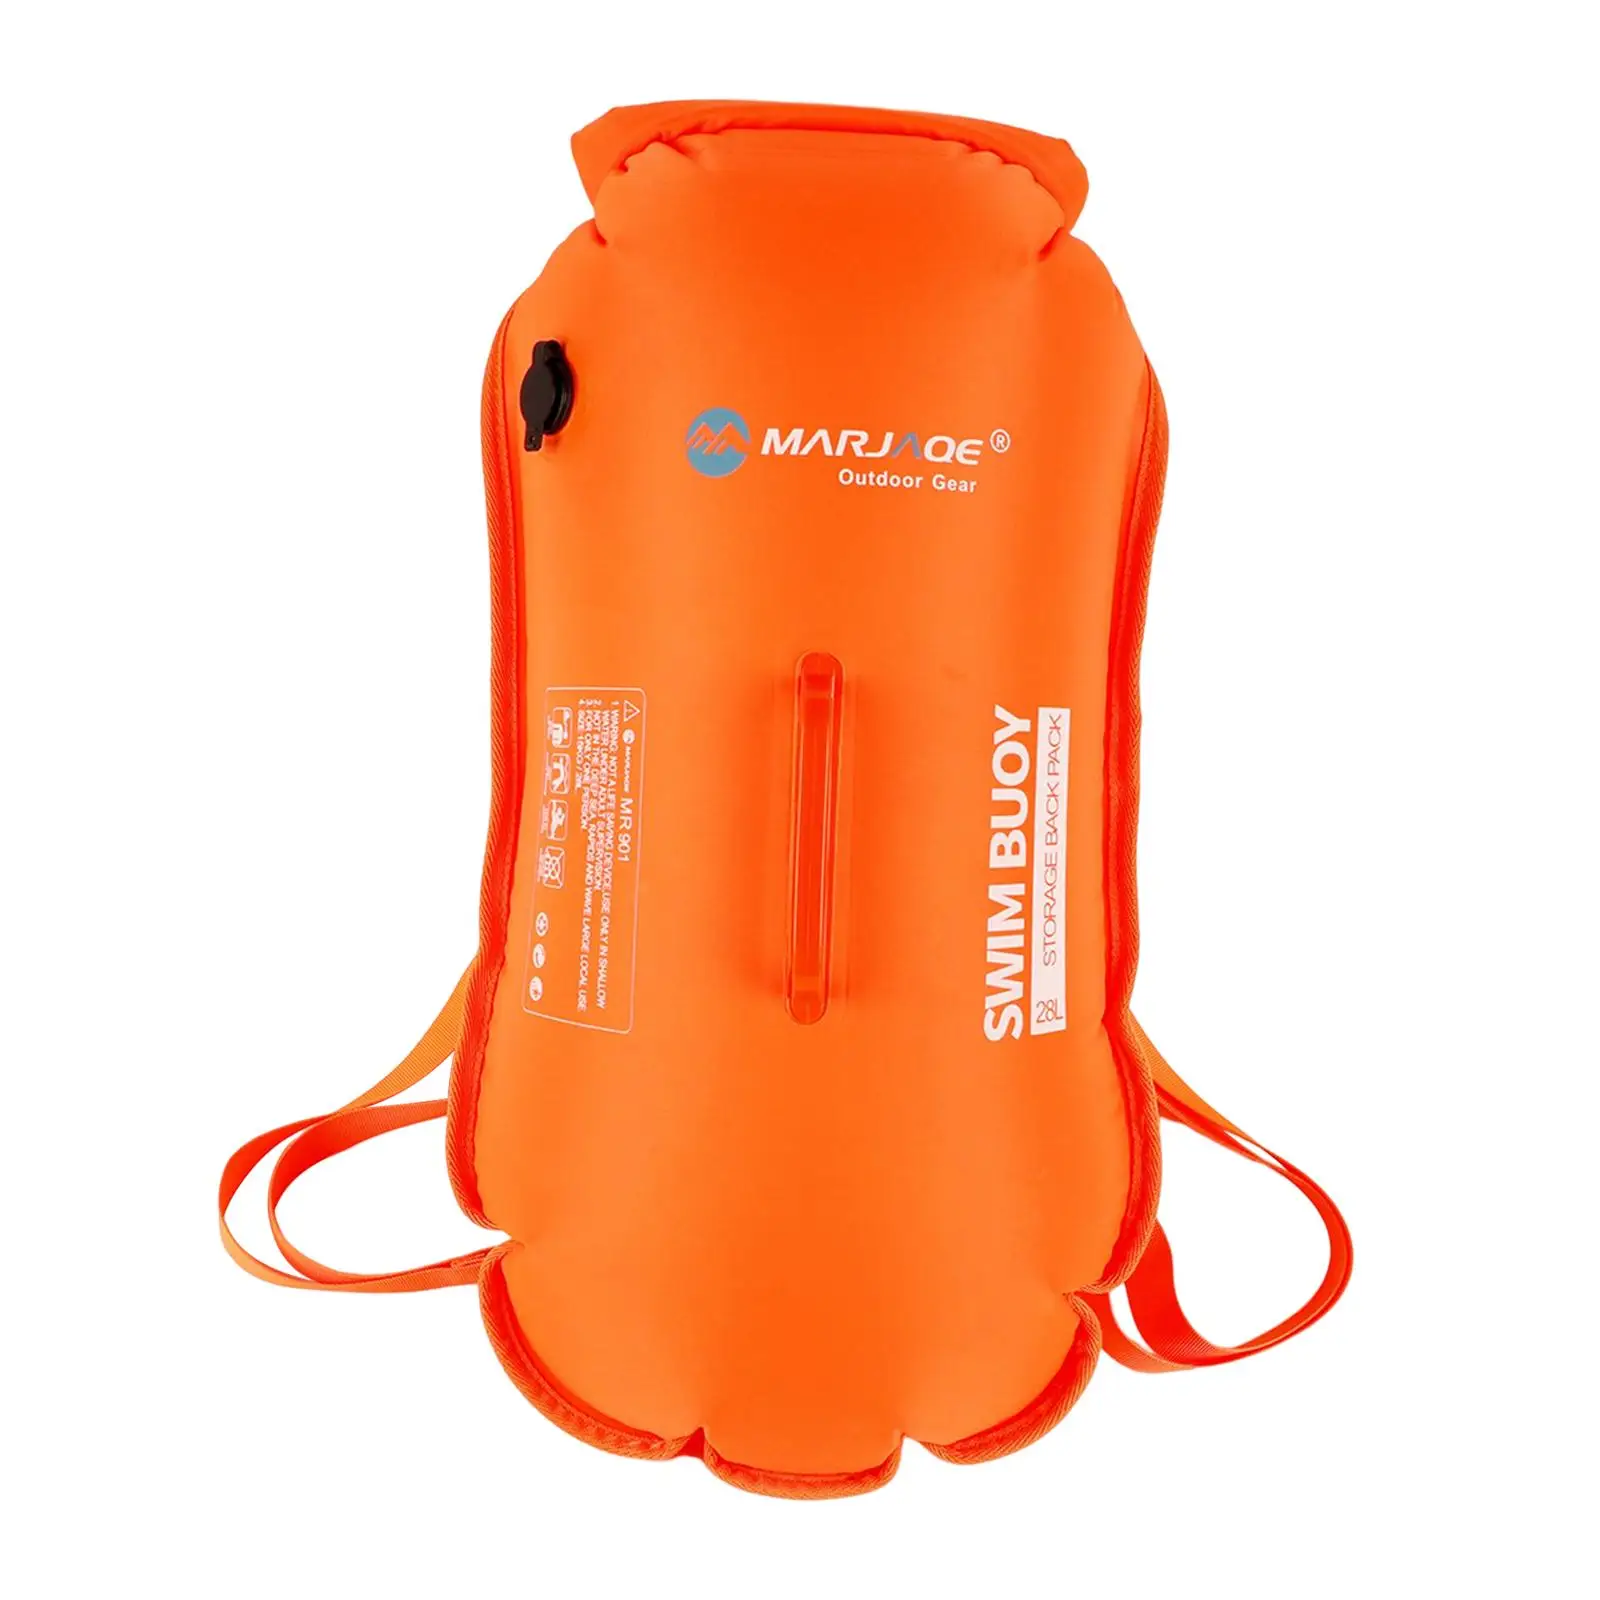 Swim Buoy Float Lightweight with Adjustable Waist Belt with Storage Detachable for Beach Triathletes Camping Snorkelers Training